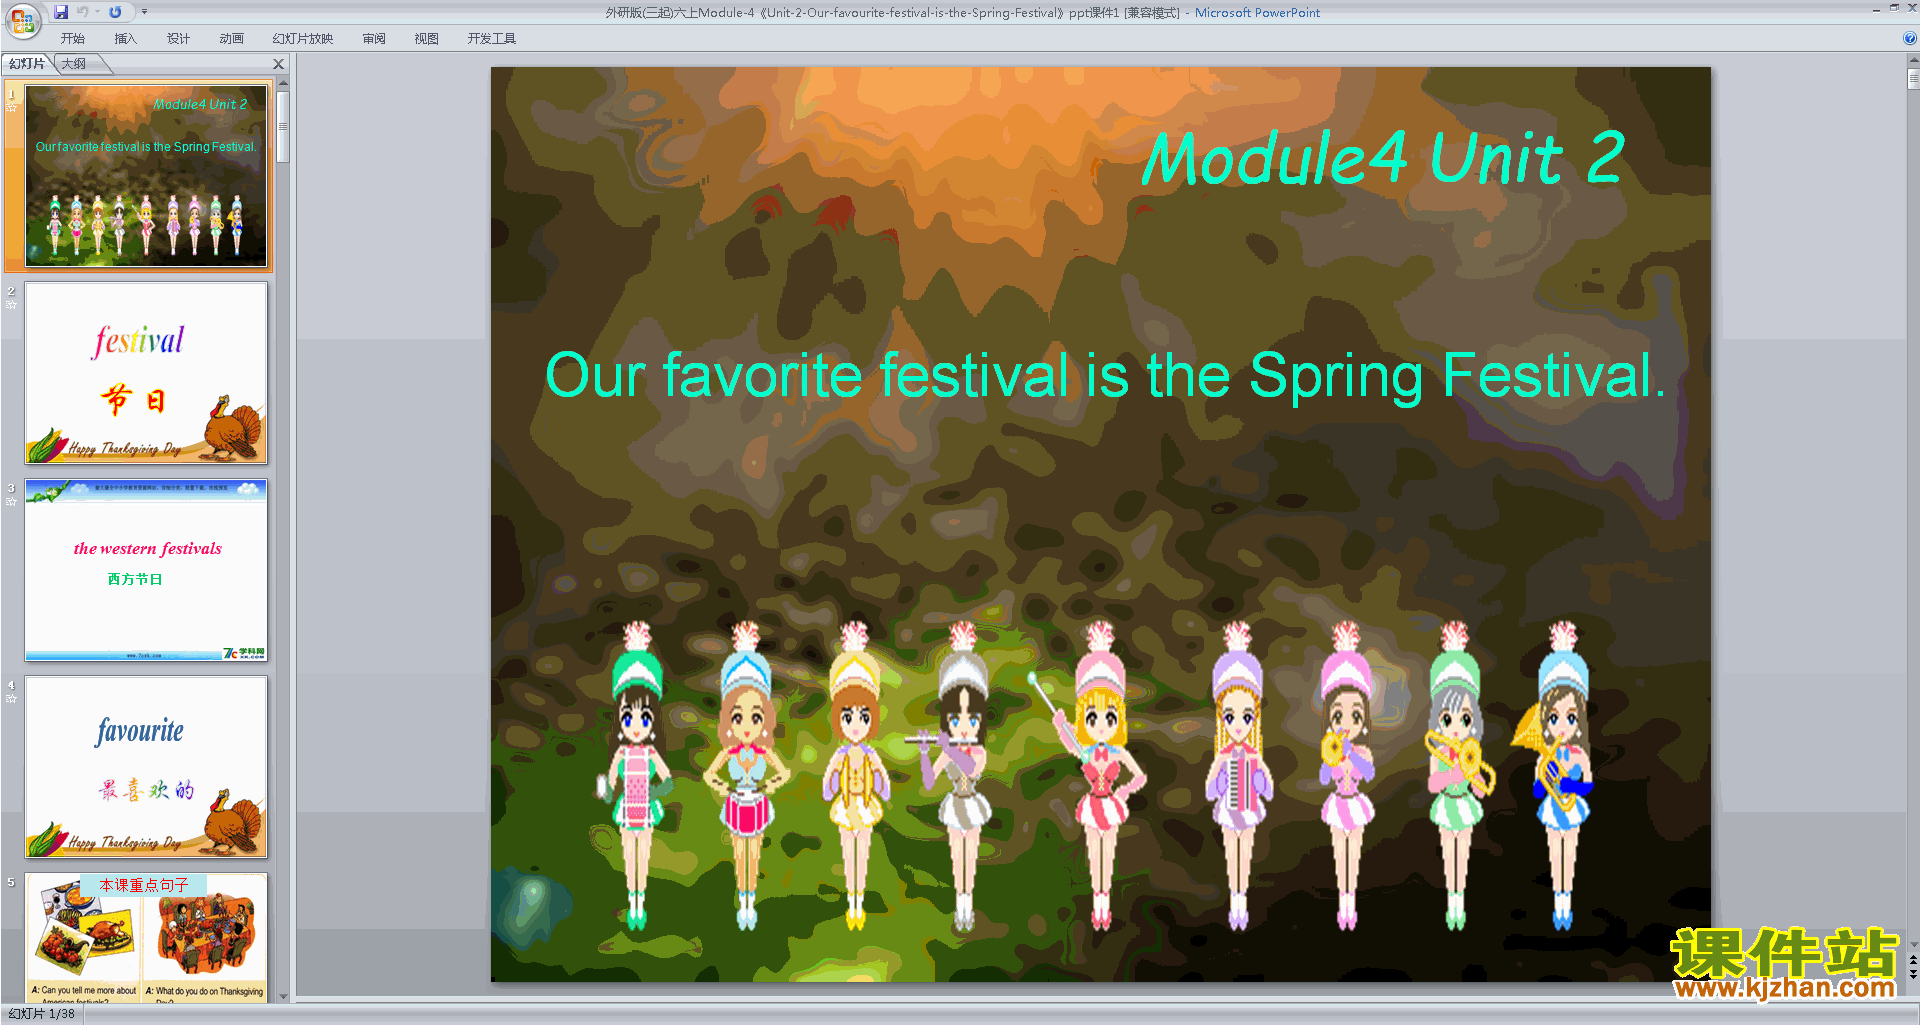 Unit2 Our favourite festival is the Spring Festival pptμ1